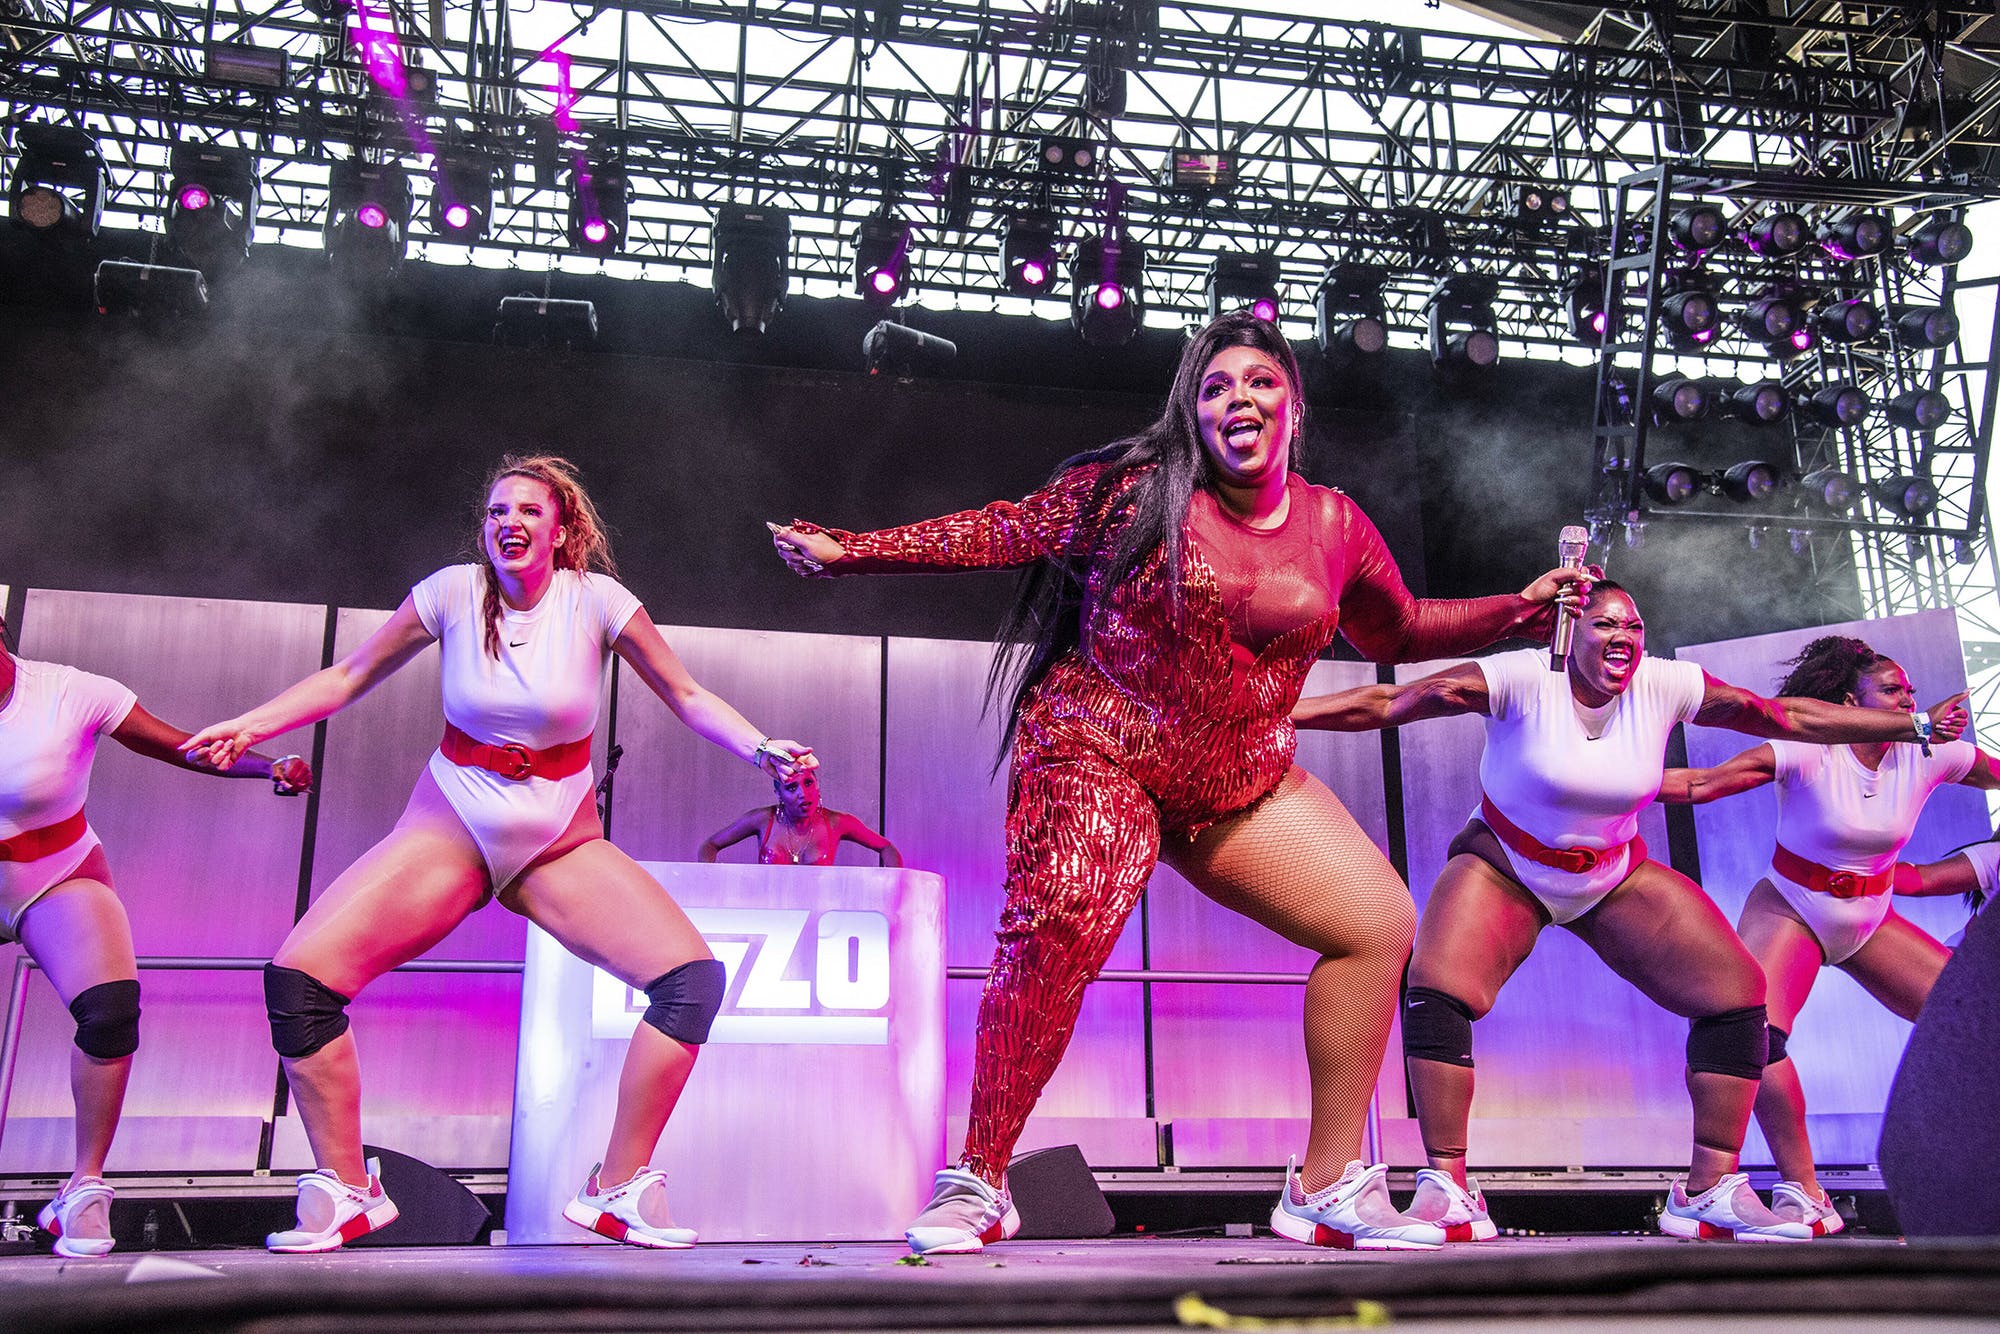 lizzo-performing-on-stage-with-her-dance-team-big-grrls